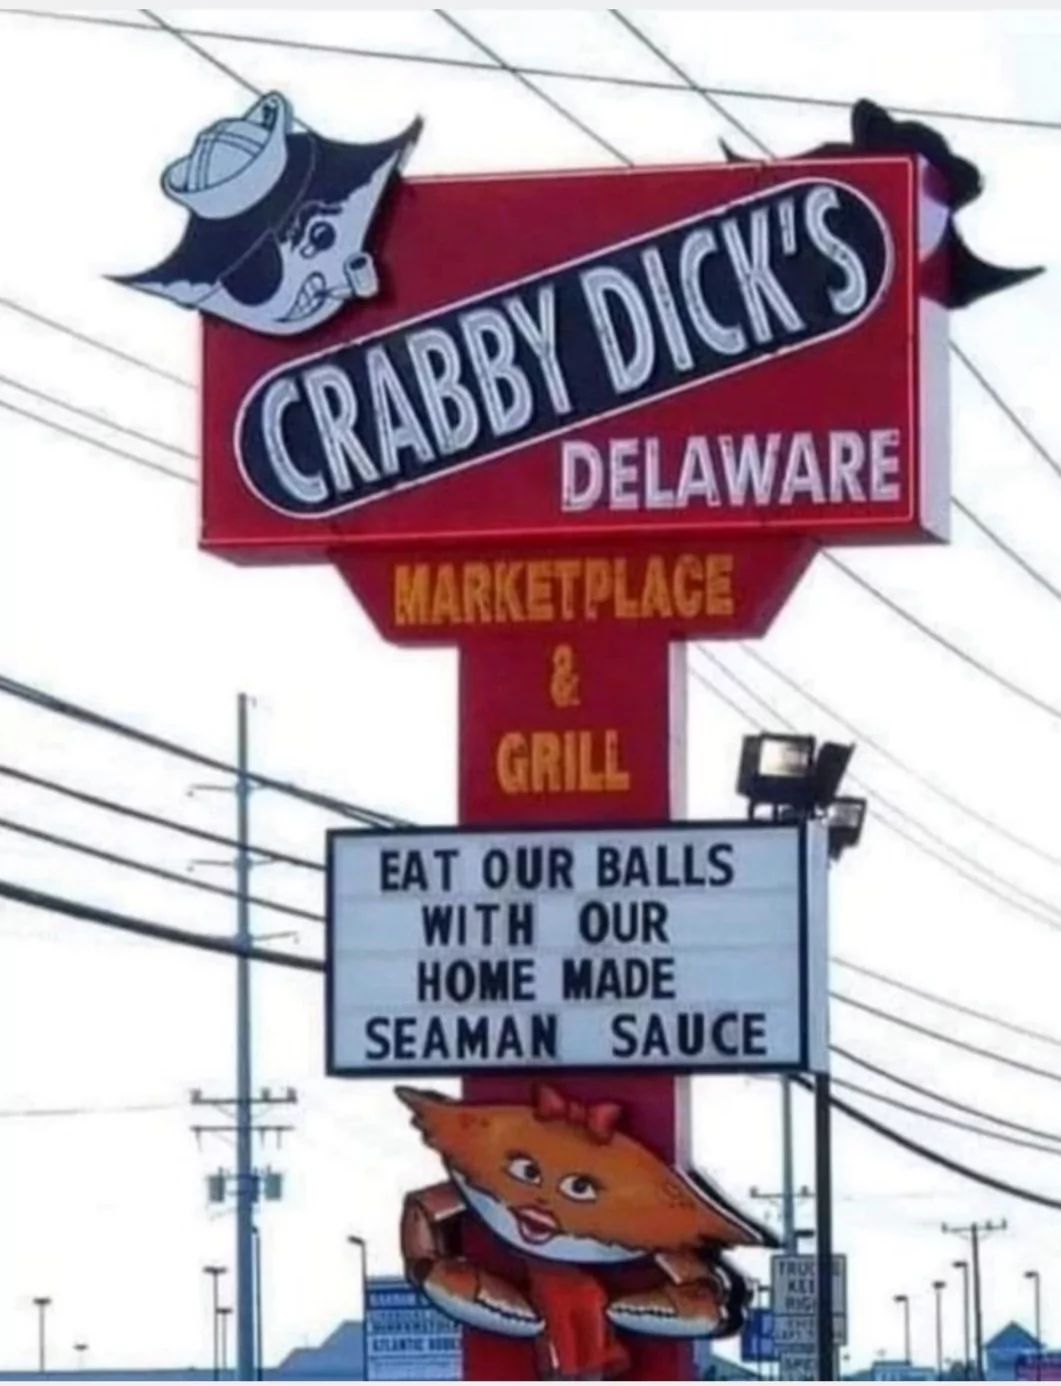 CRABBY DICK'S
DELAWARE
MARKETPLACE
R
GRILL
EAT OUR BALLS
WITH OUR
HOME MADE
SEAMAN SAUCE
TRUX
KEI
RIGI